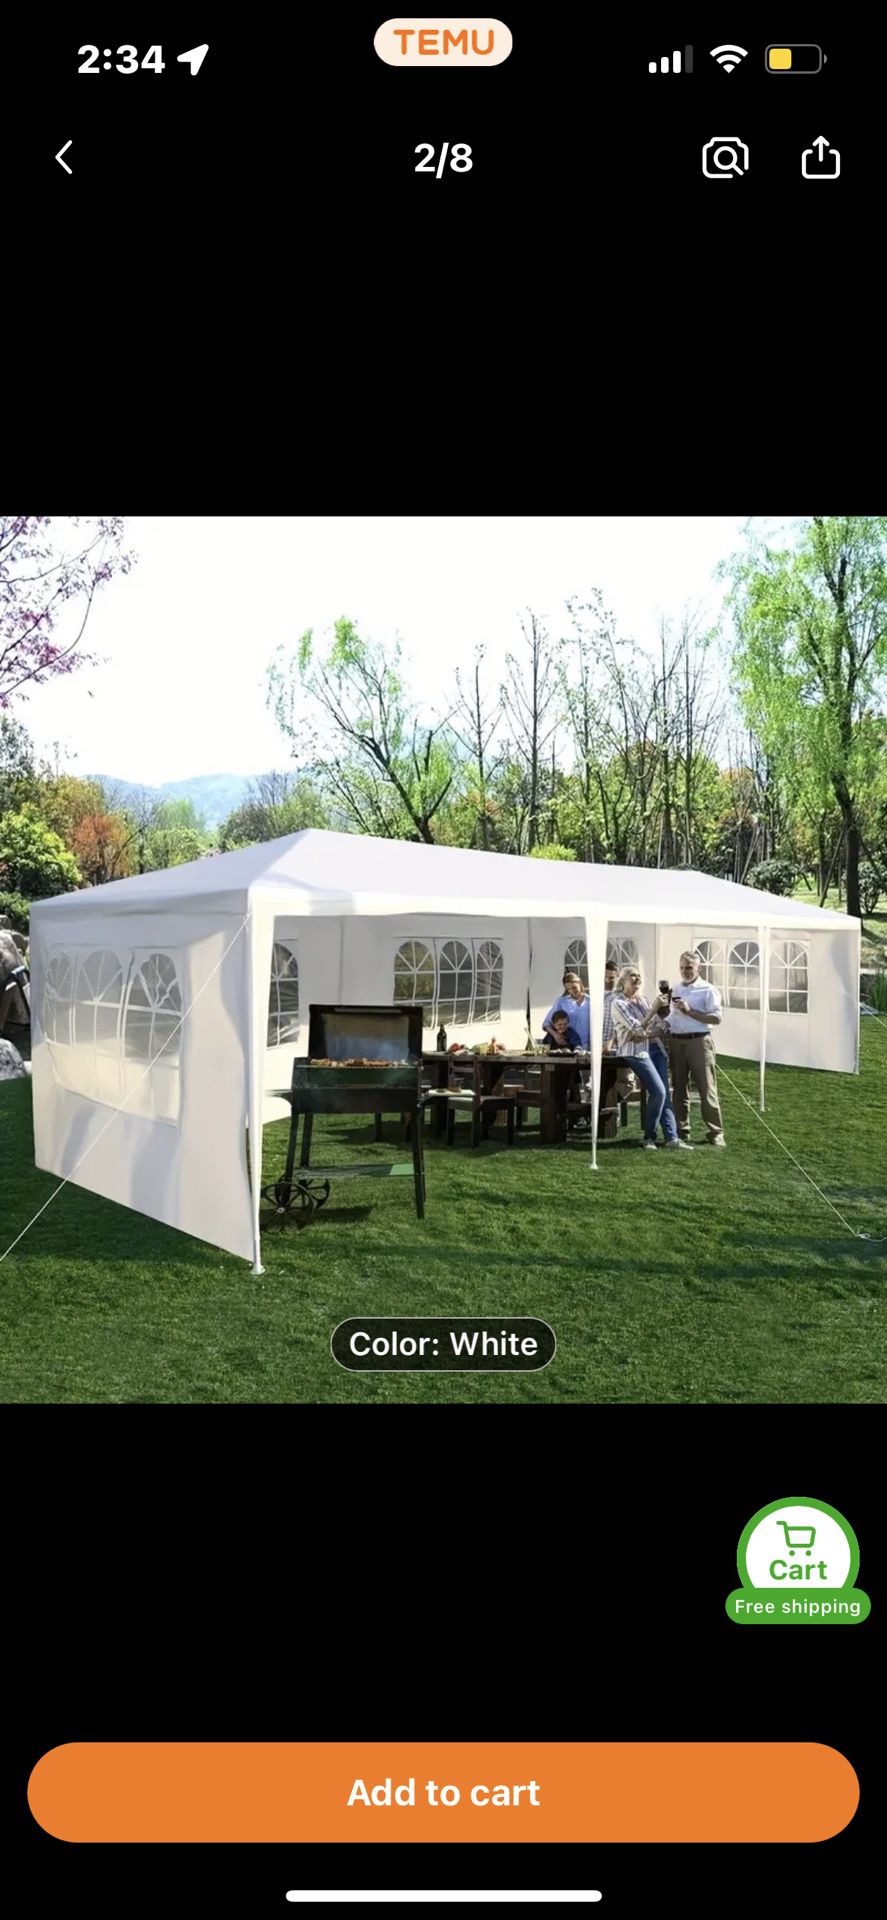 10’ X 30’ Party Tent NEW Hilliard $140